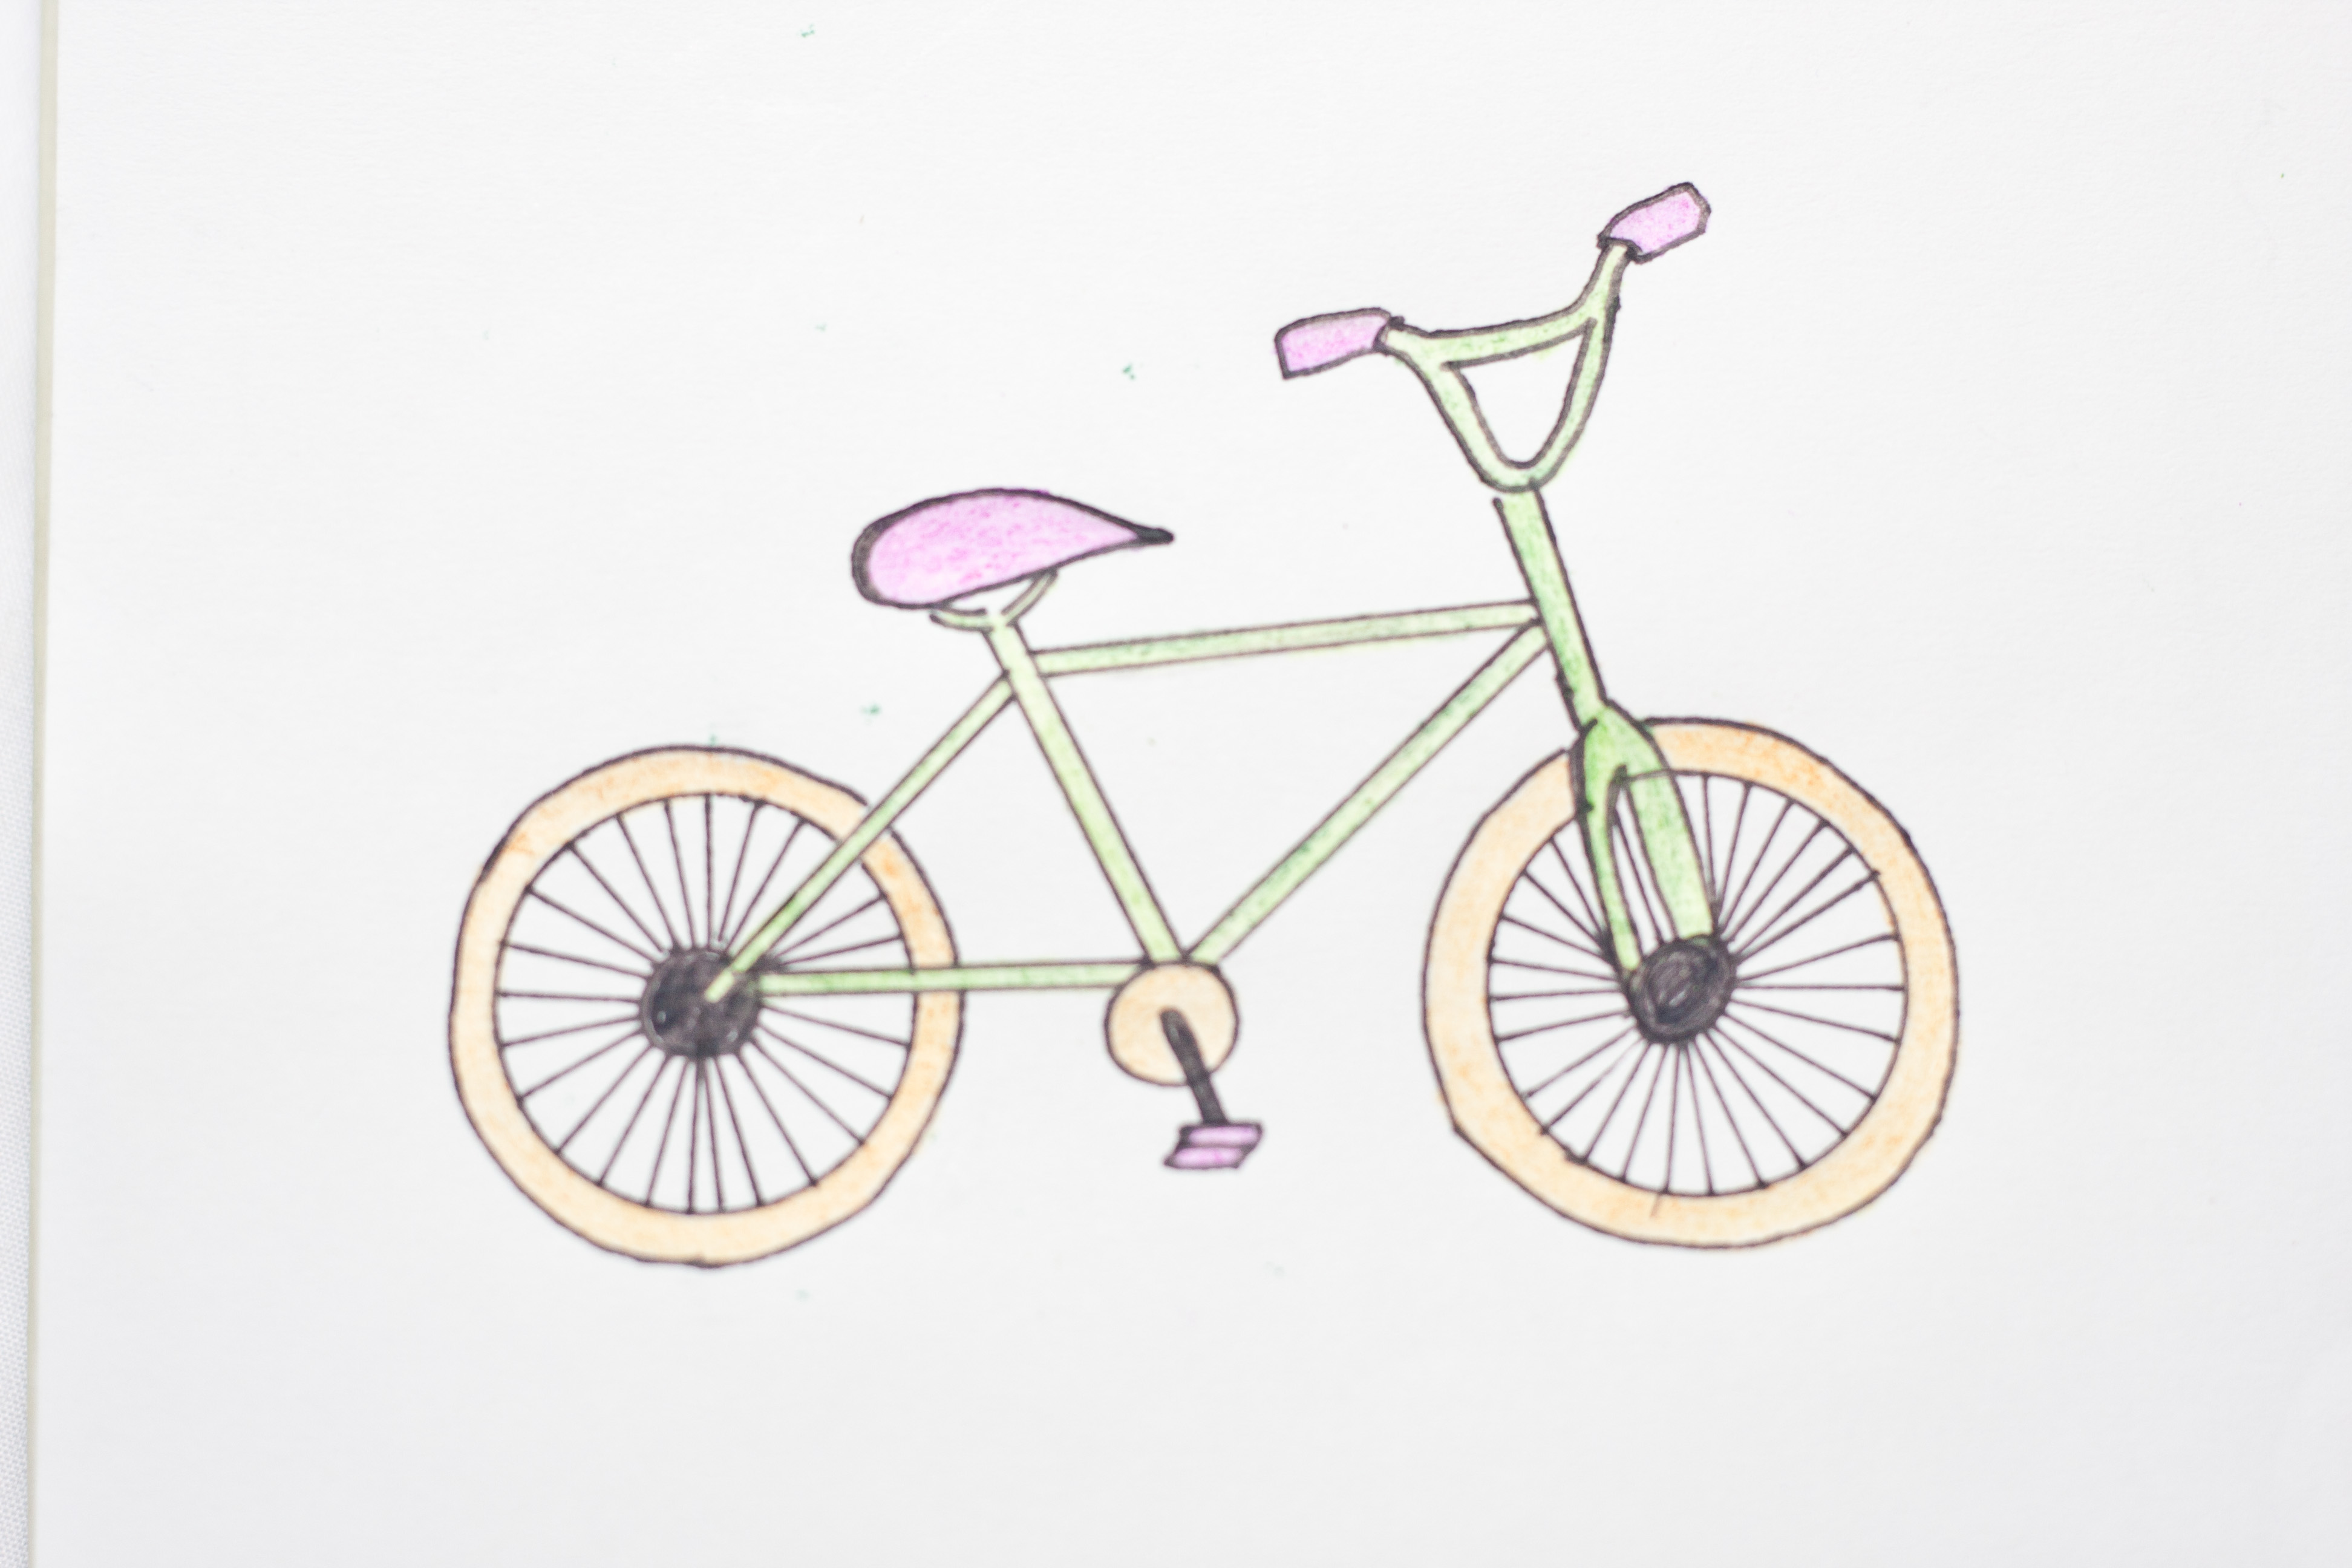 Bicycle Drawing, Pencil, Sketch, Colorful, Realistic Art Images